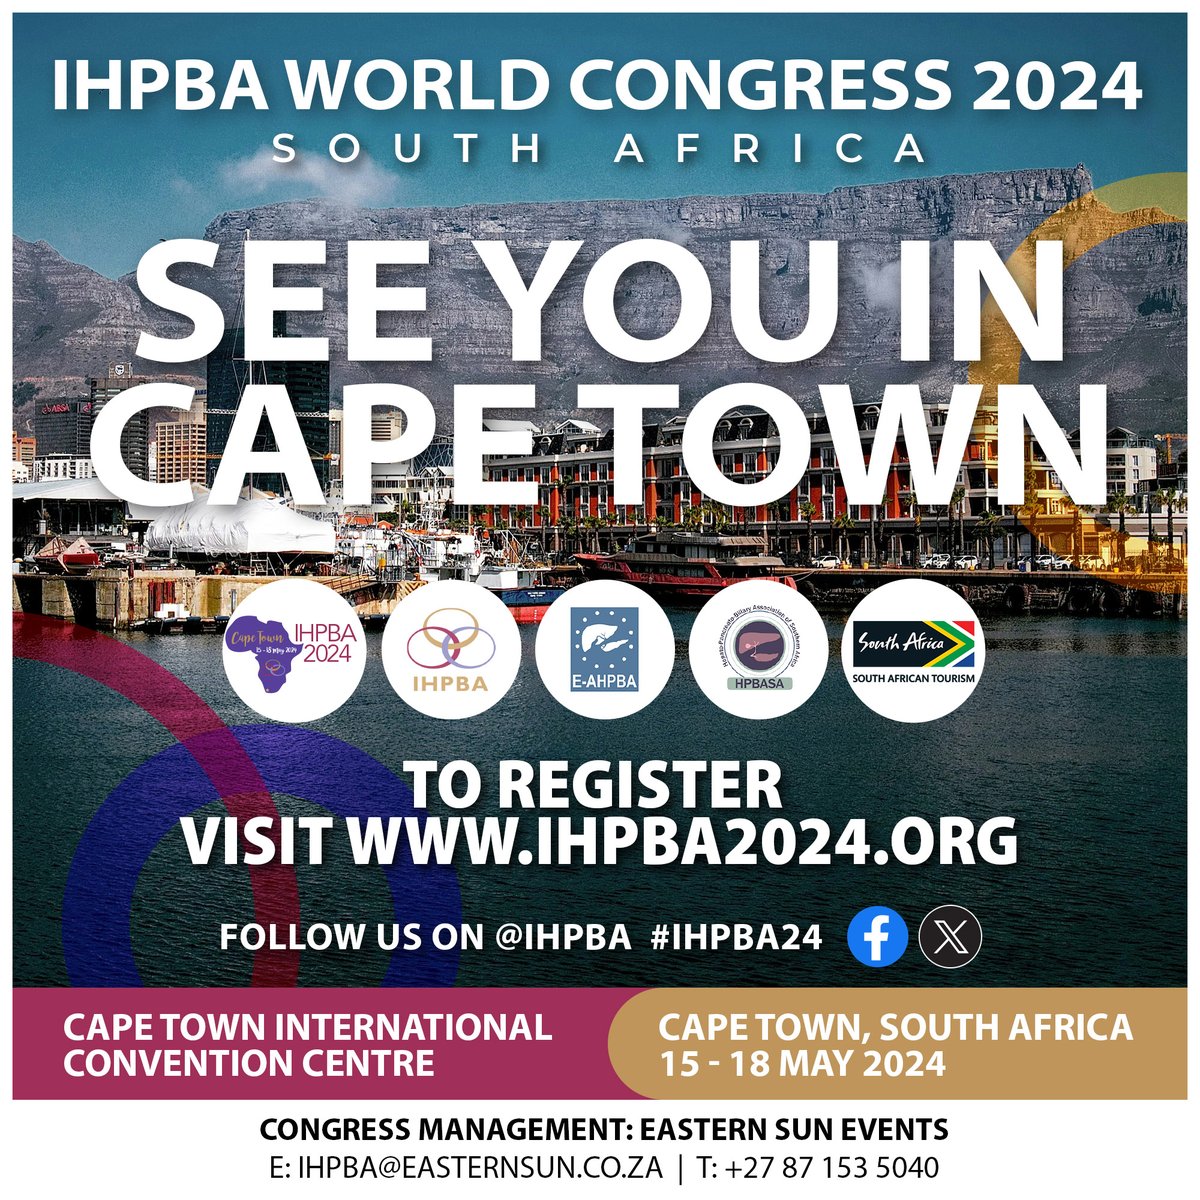 We are on the way to Cape Town 🇿🇦 we look forward to seeing everyone there #seeyouincapetown #IHPBA24